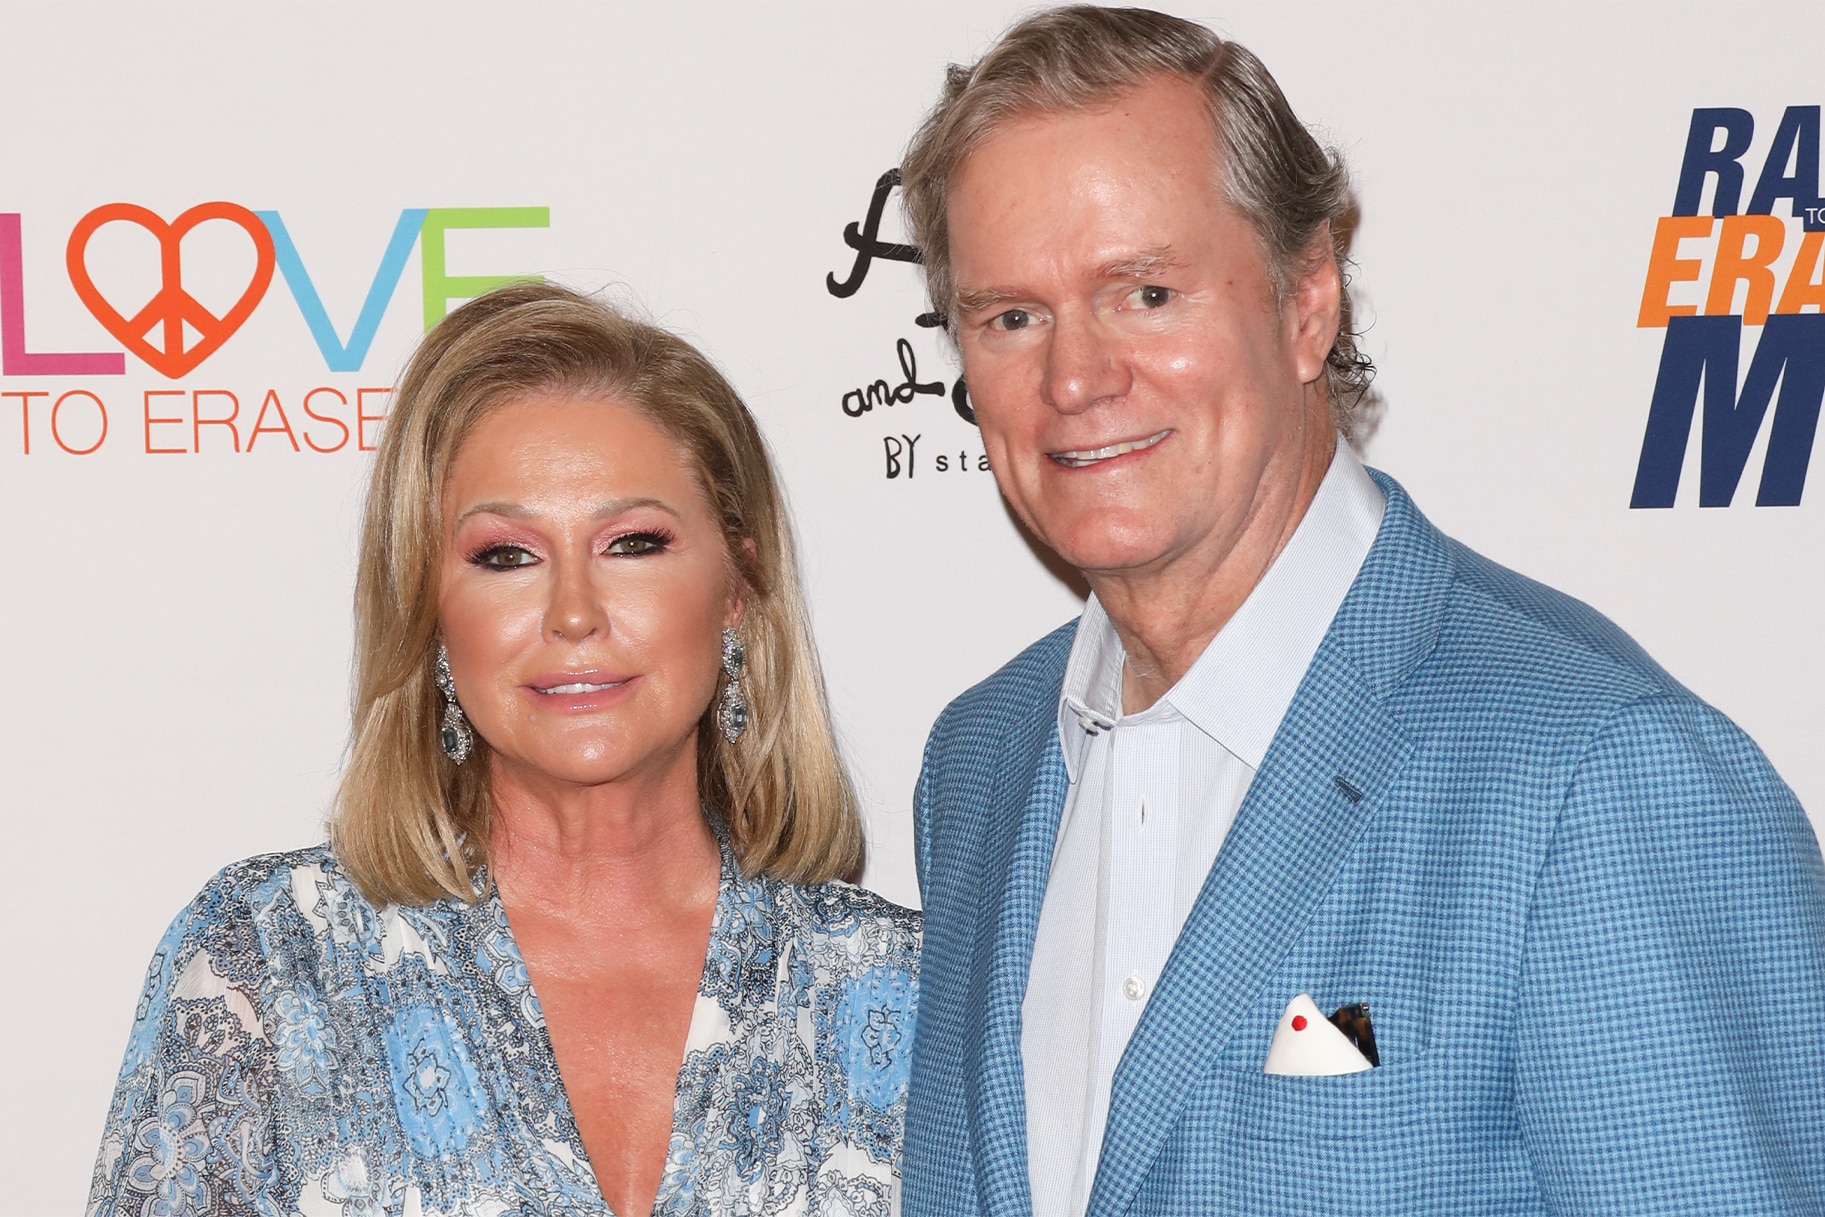 Kathy Hilton Shares What Gifts She & Rick Buy for Each Other | Style & Living